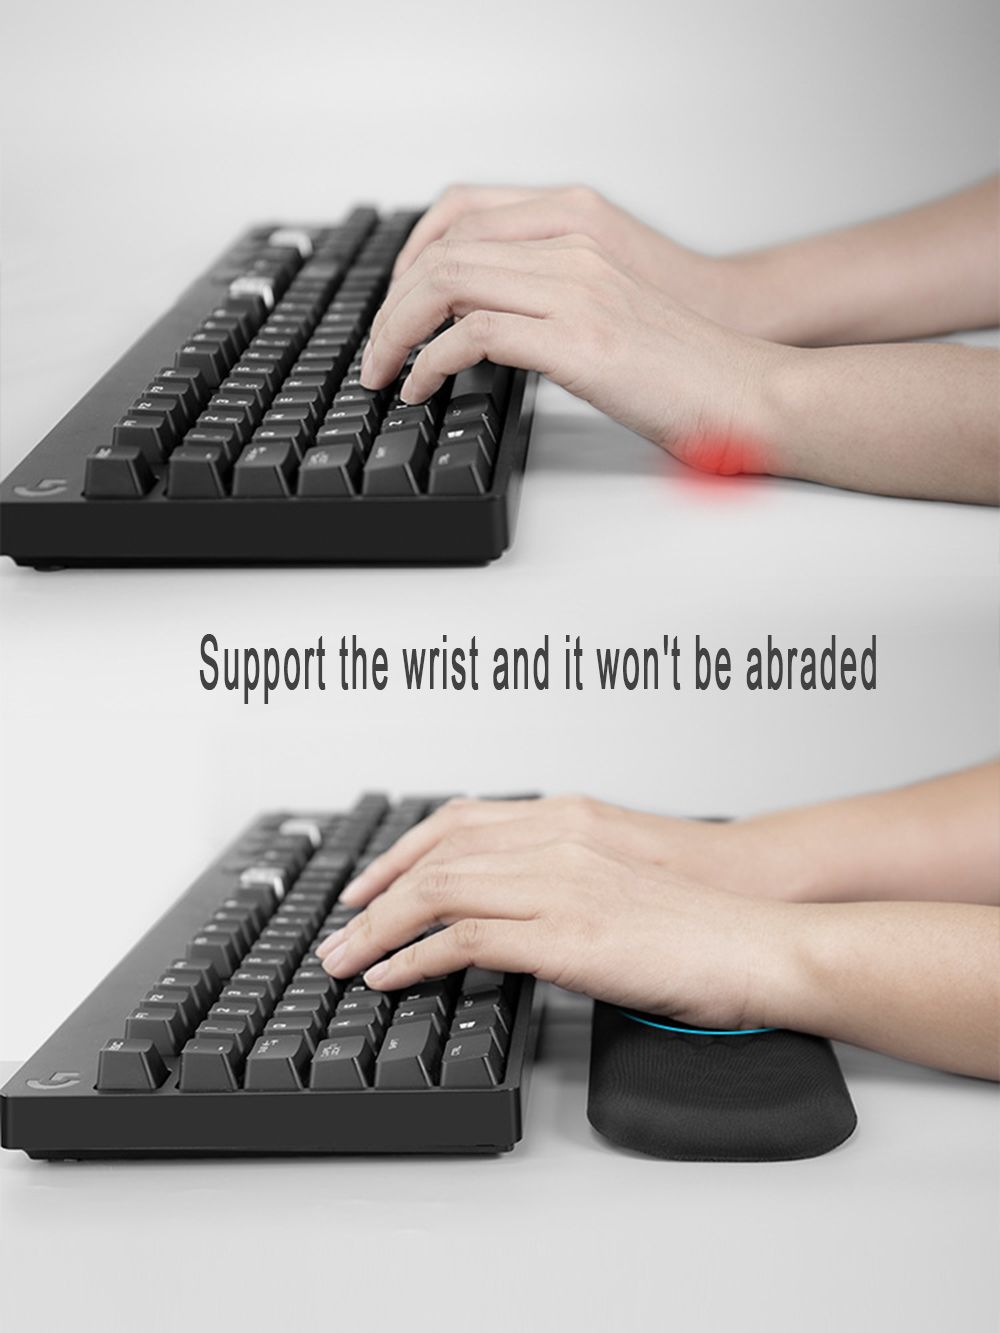 Vaydeer-STA03-Keyboard-Holder-Mouse-Pad-Wrist-Memory-Cotton-Mechanical-Office-Computer-Hand-Protecti-1727261